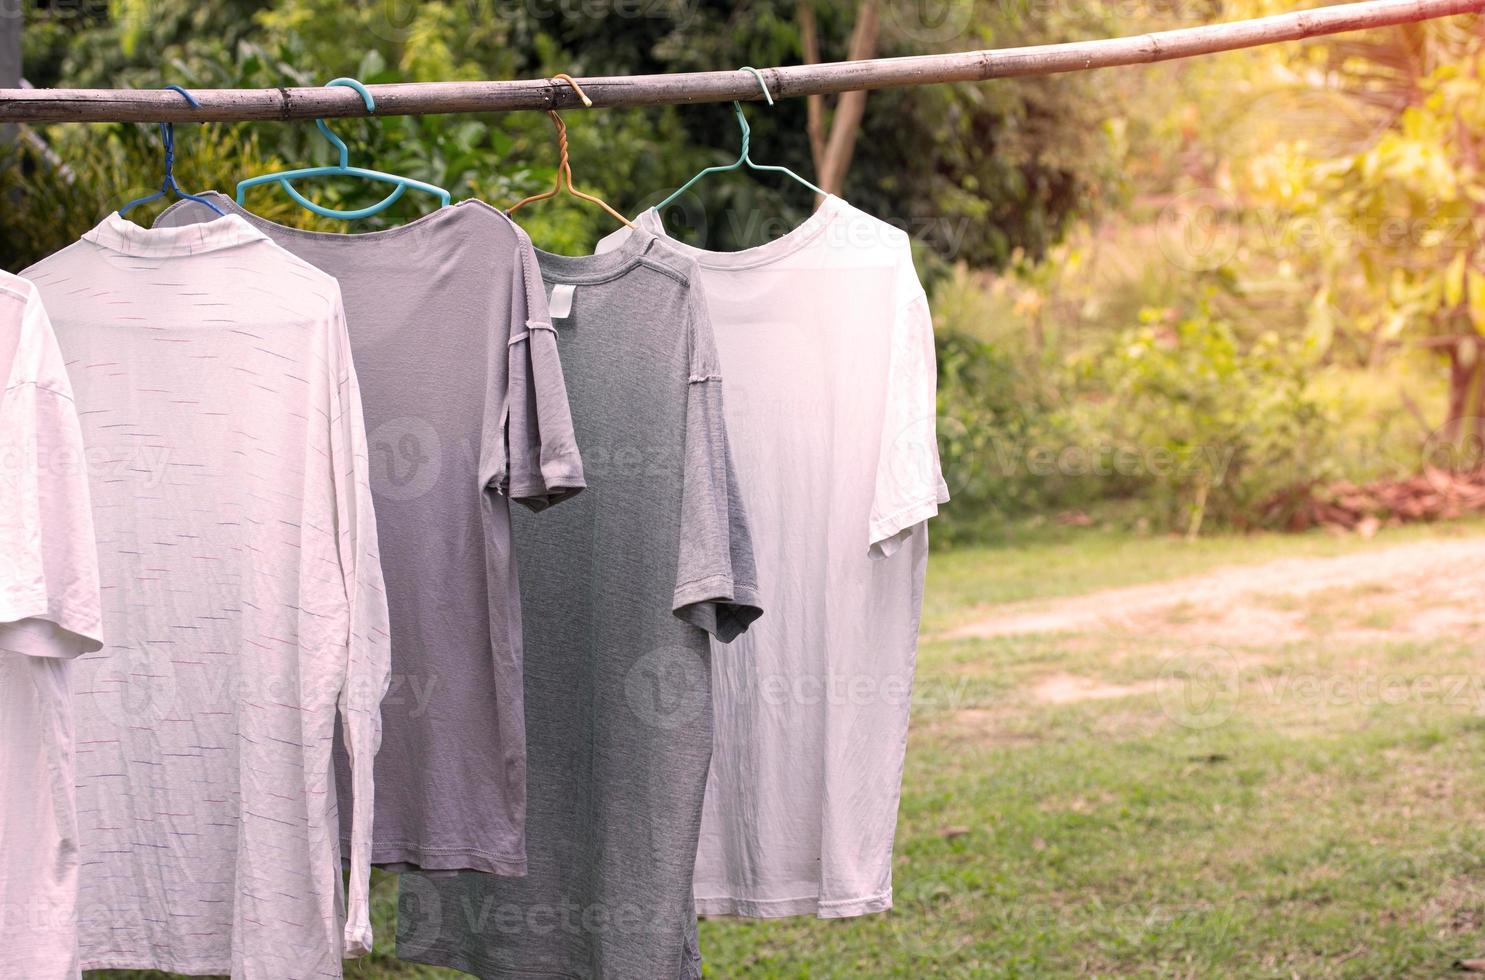 T-shirts hanging on wooden bar for dry after cleaning clothes in the garden outdoor at country house photo